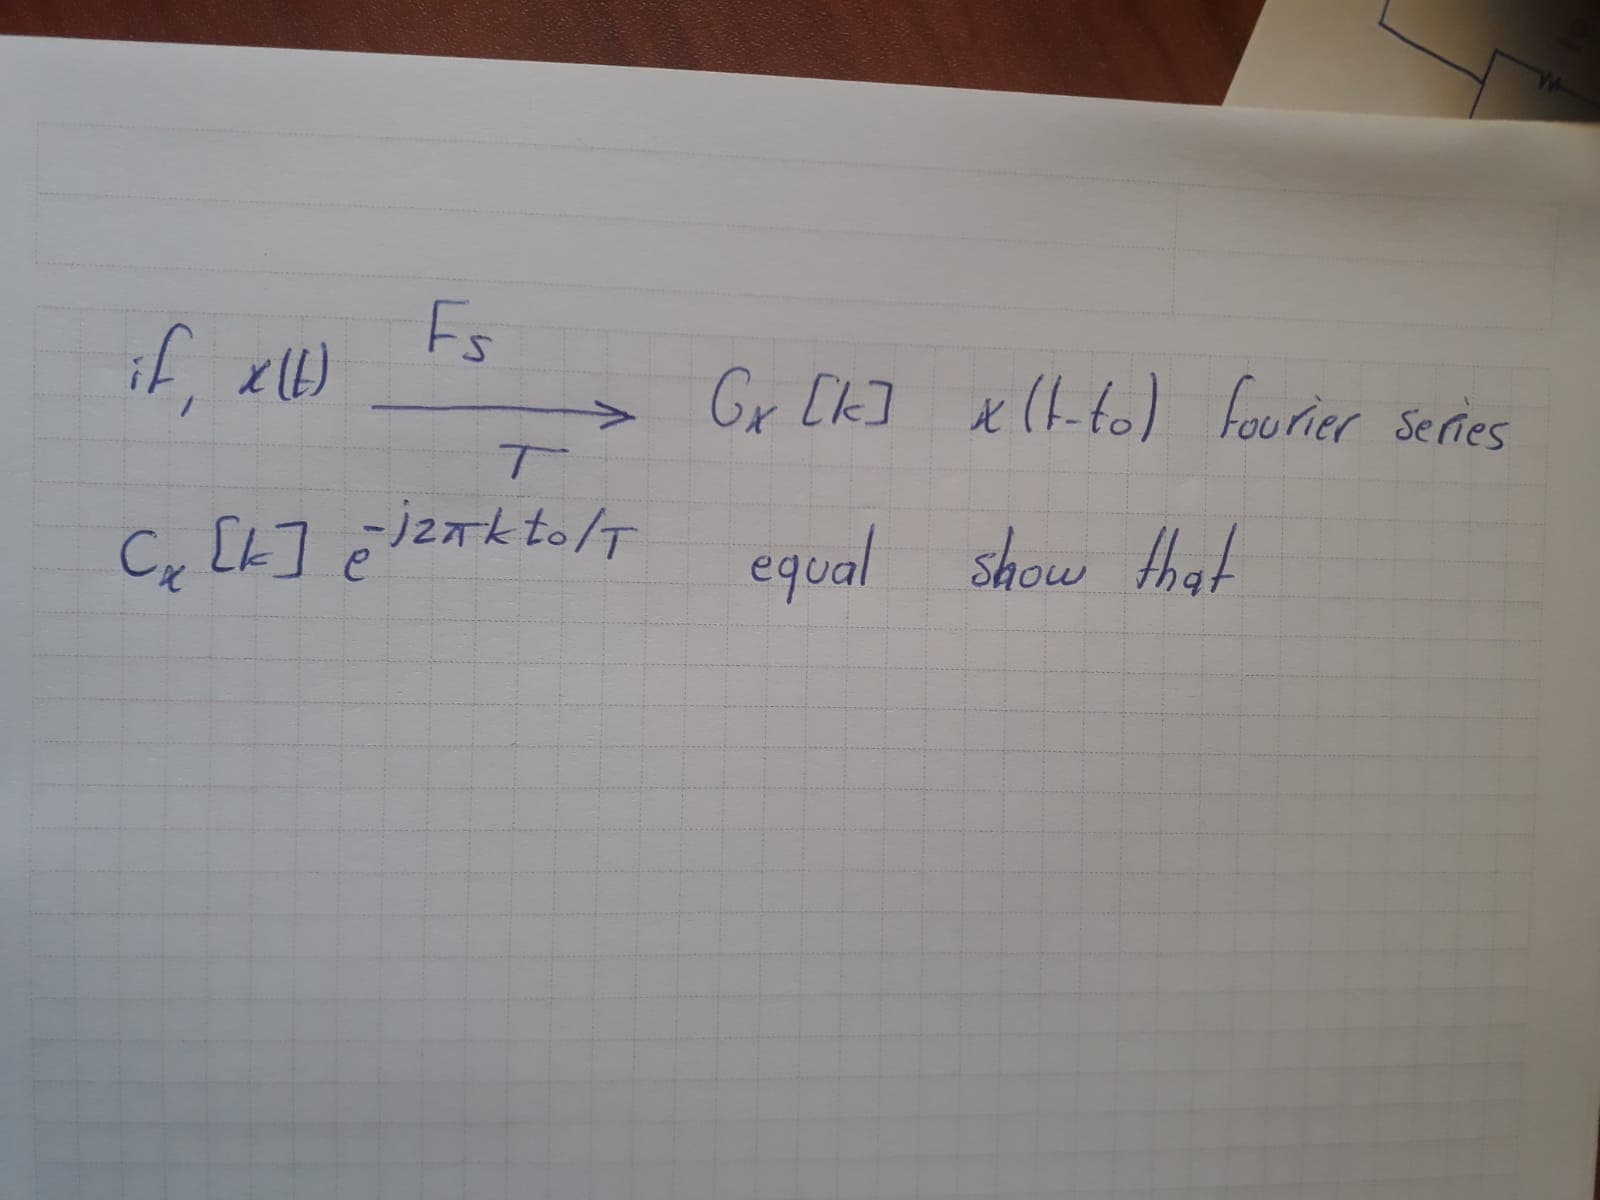 Fs
if, al
Gr Ck] x(to) fourier Series
->
Se ries
C, [k] ¿ iznk to/T
equal show that
